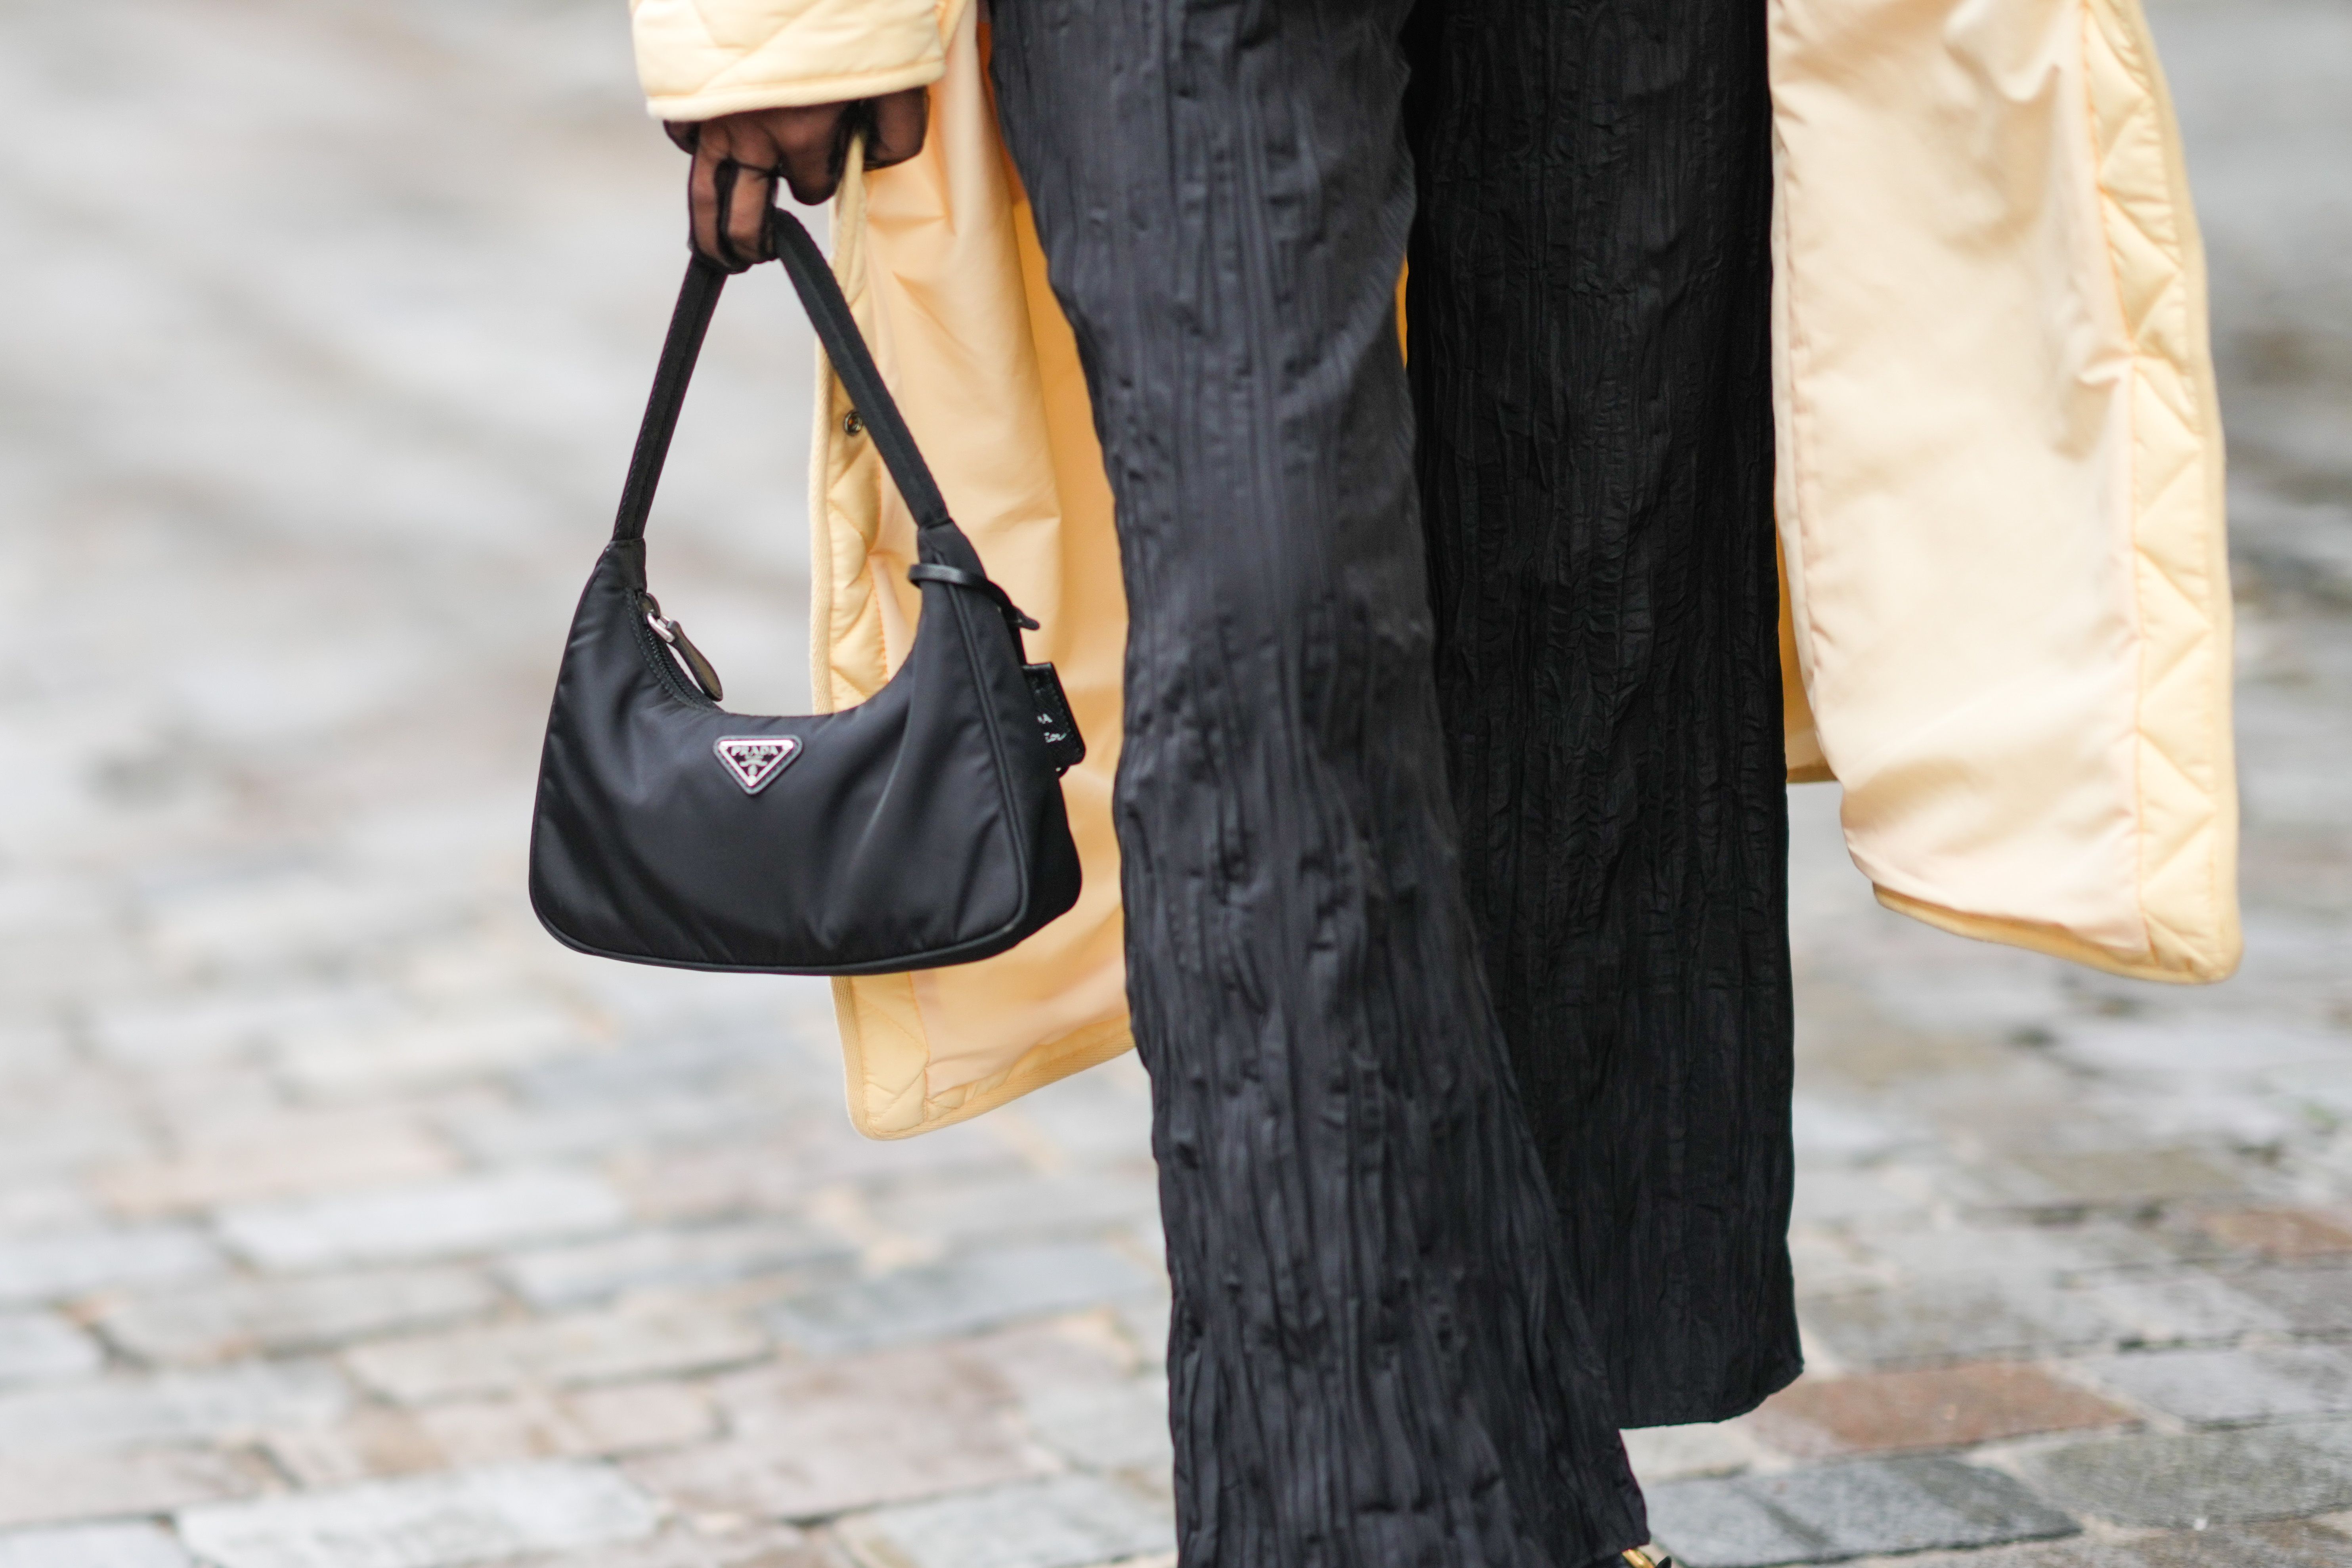 How to choose a handbag that won't go out of fashion